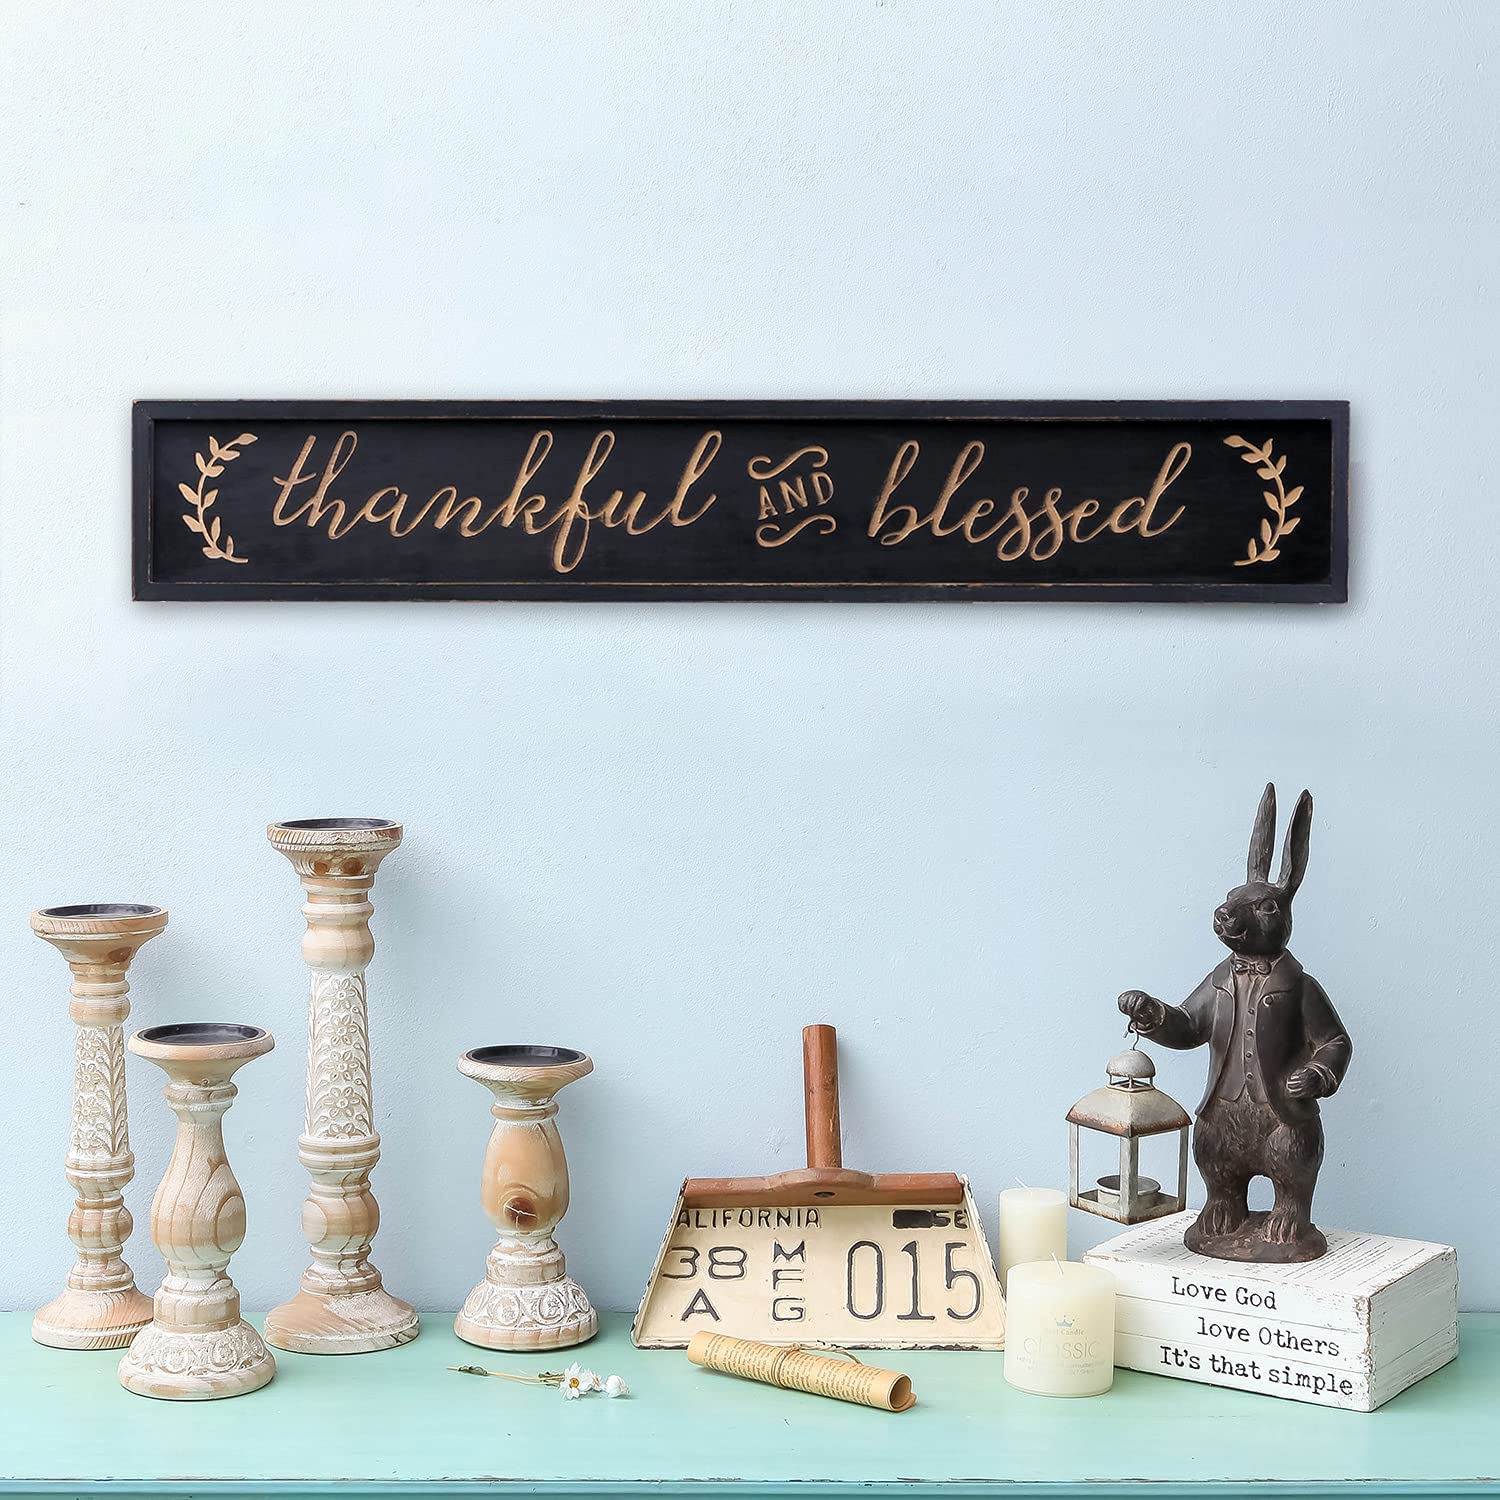 NIKKY HOME Thankful and Blessed Carved Wood Framed Wall Plaque Sign with Inspirational Quote, 36